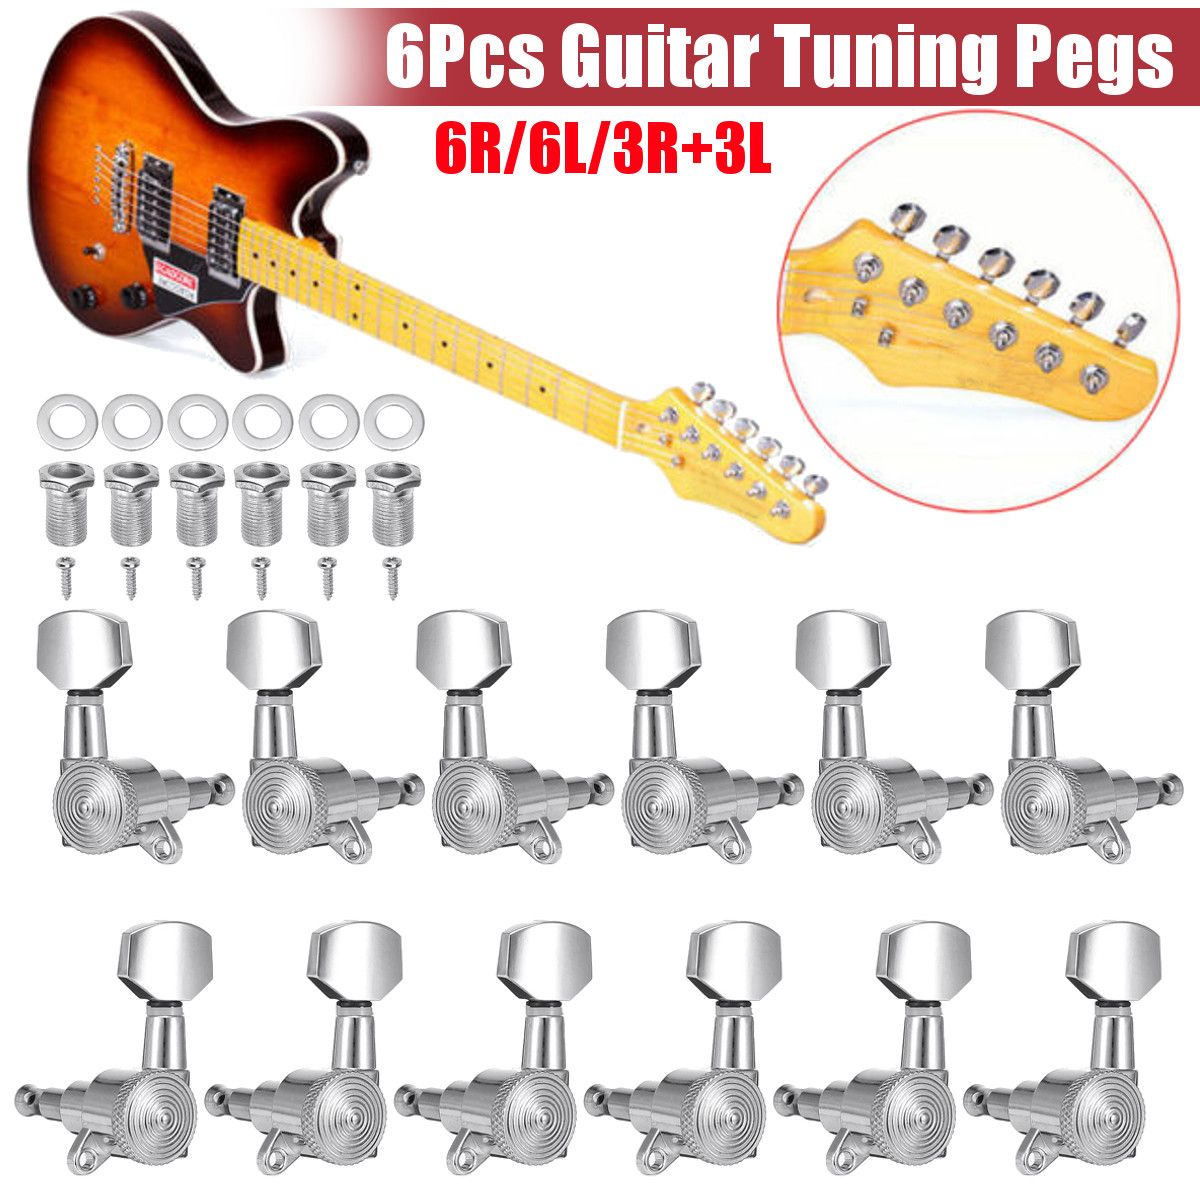 6PcsSet-Tuning-Pegs-Keys-Locking-Tuner-Heads-6R-6L-for-Electric-Wooden-Guitar-Parts-1631319